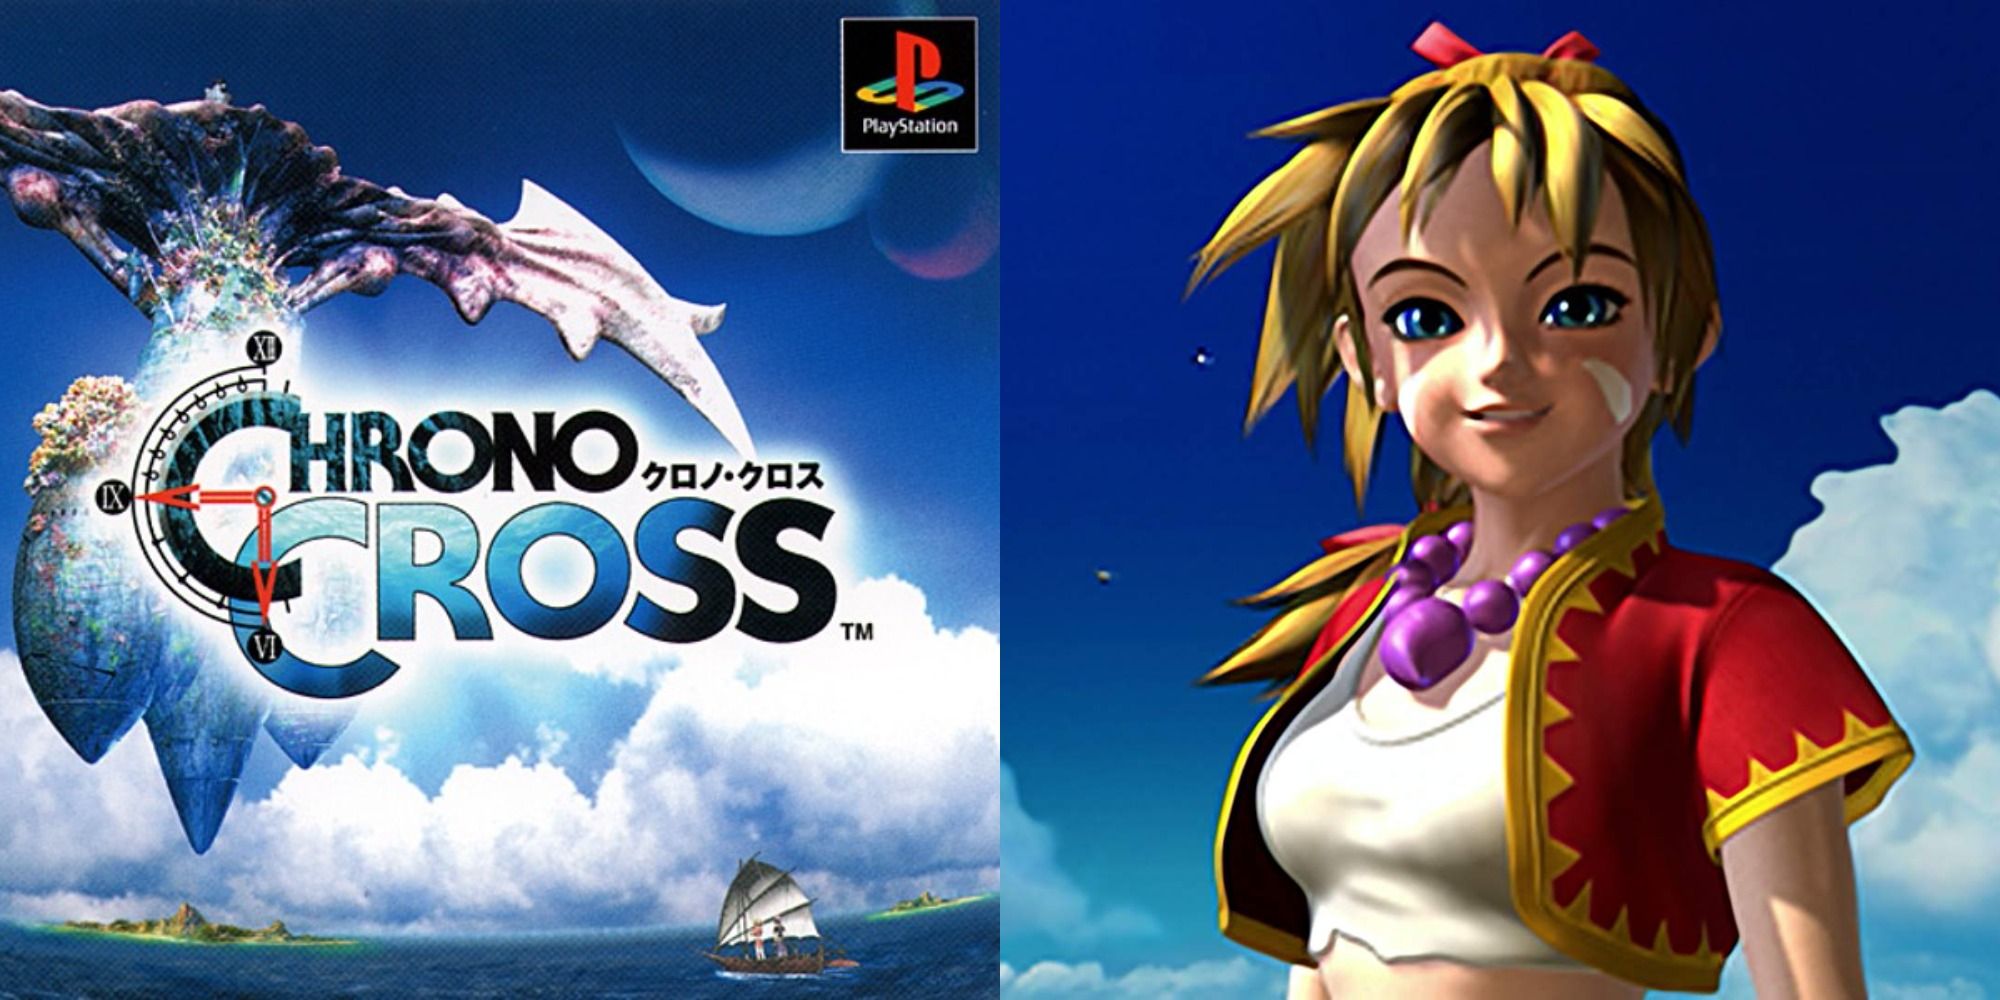 Split image showing the cover for Chrono Cross and the character Kid